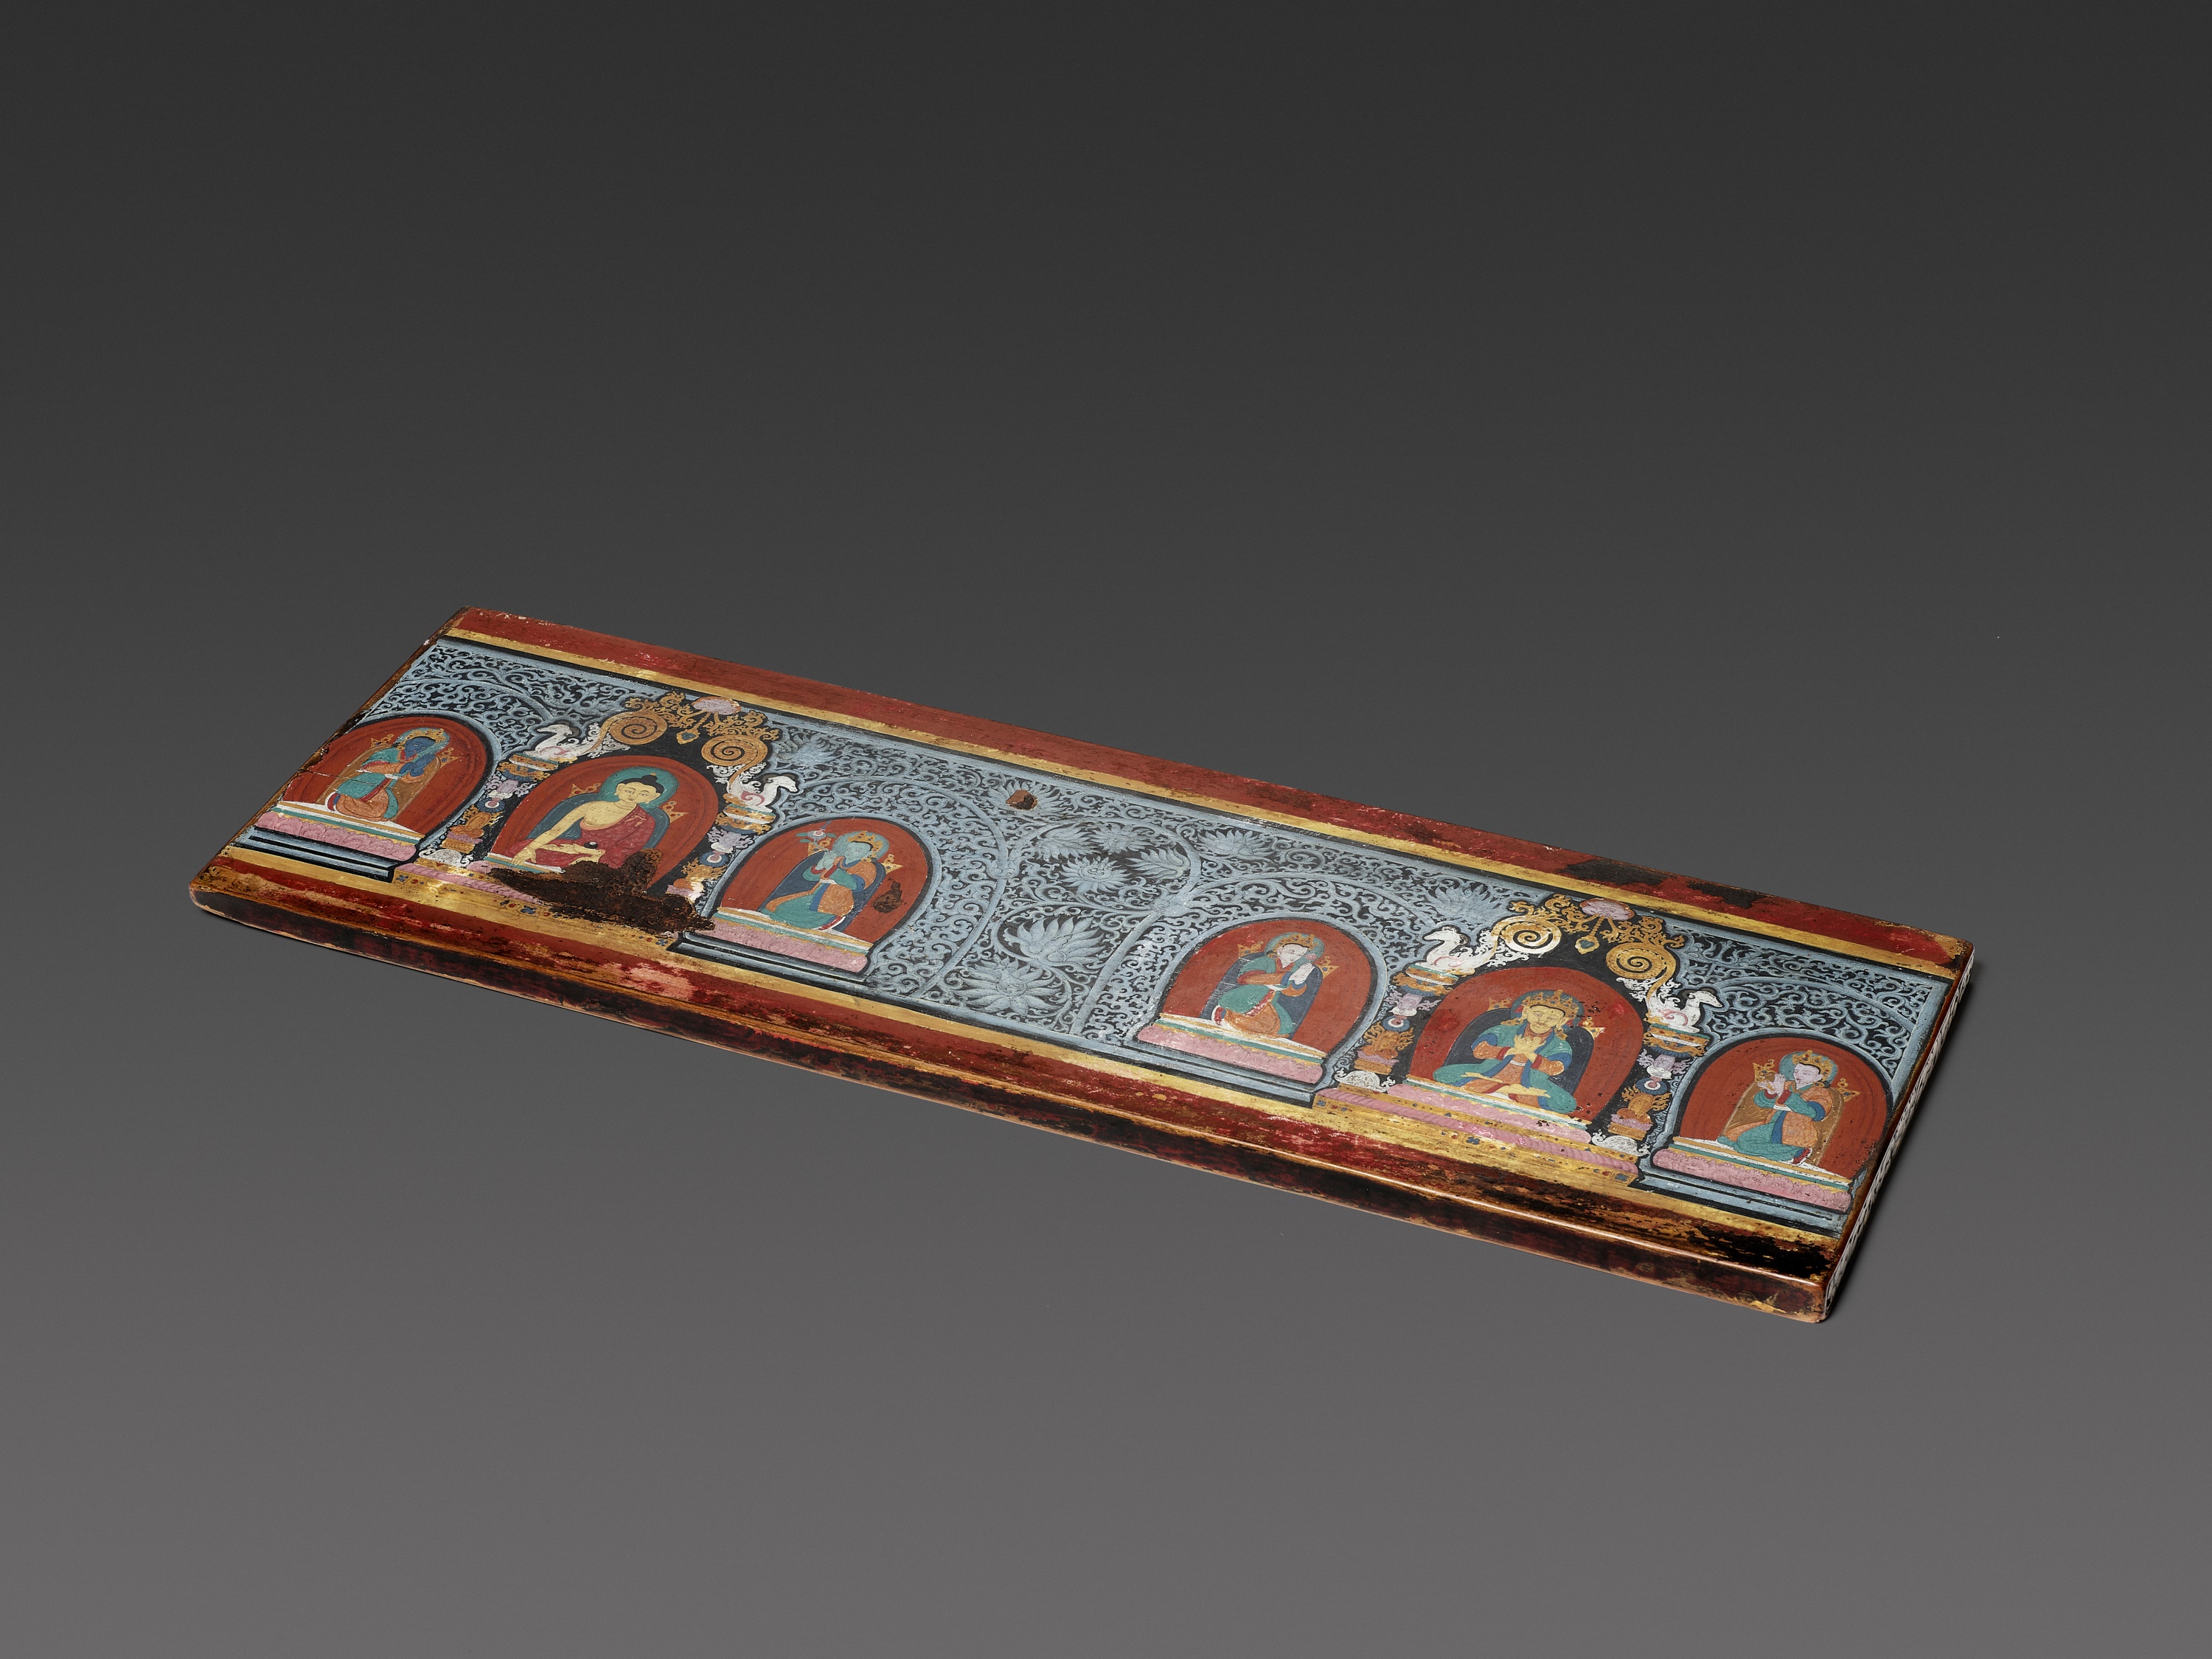 A RARE AND VERY LARGE PAINTED WOOD SUTRA COVER, NEPAL, CIRCA 1450 - Image 6 of 8